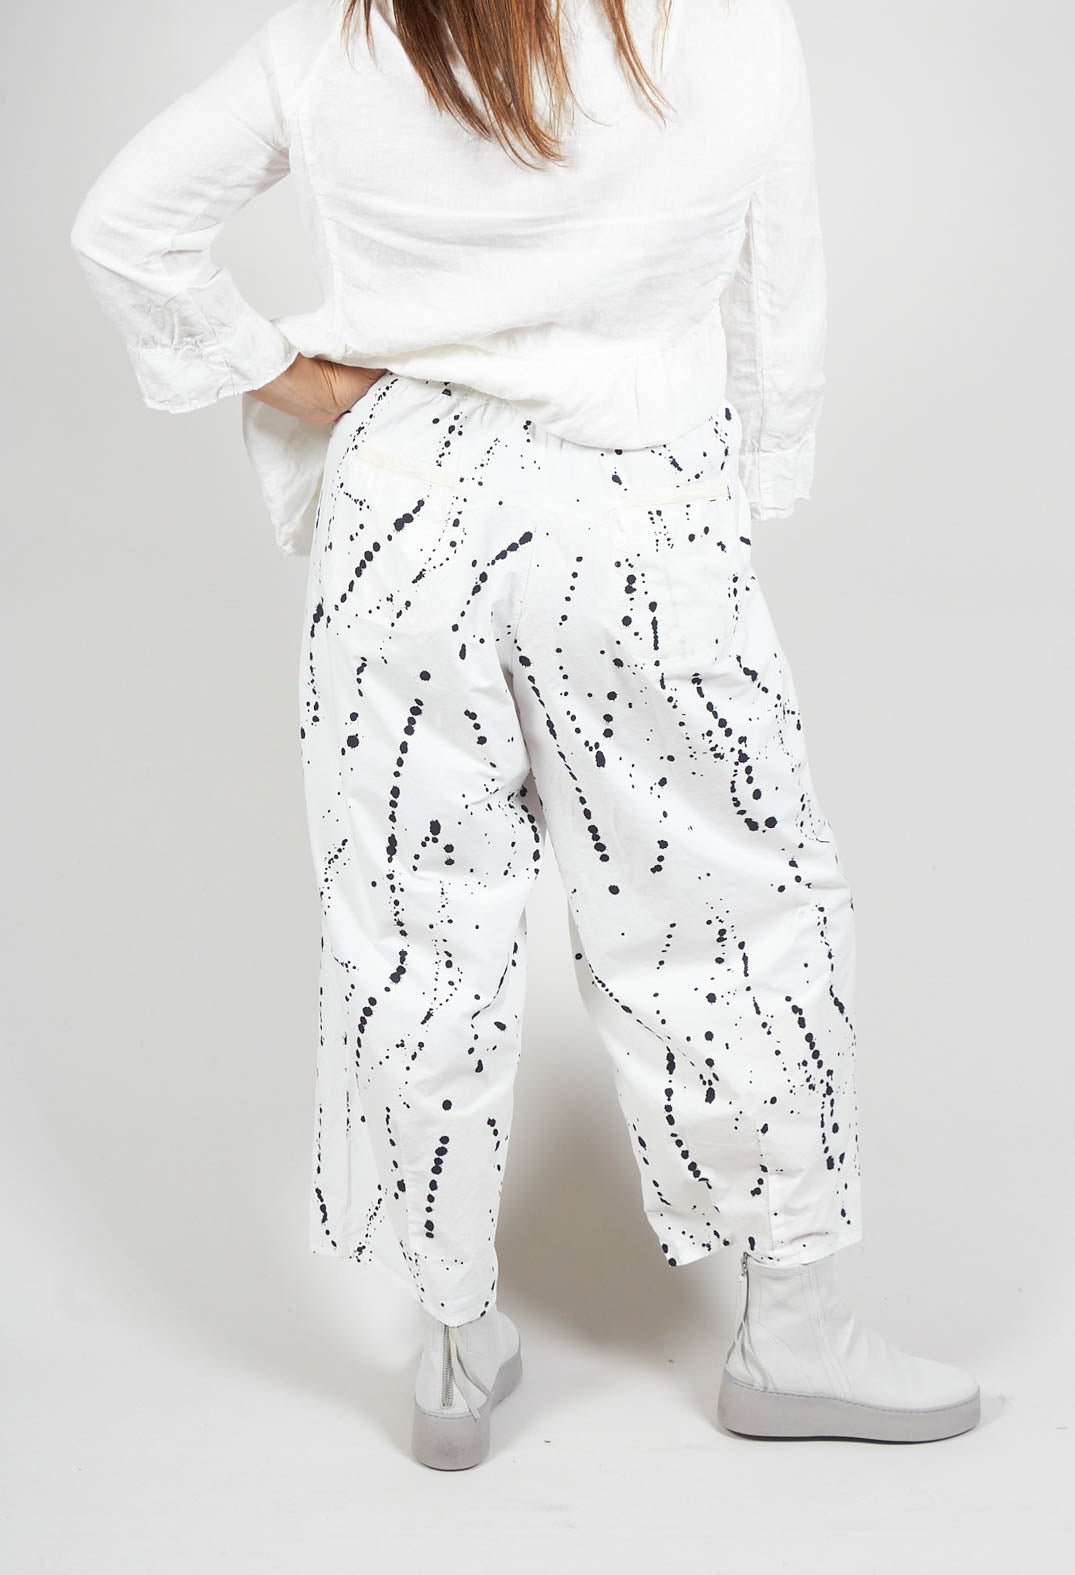 Prudentia Trousers in Inkstains Black